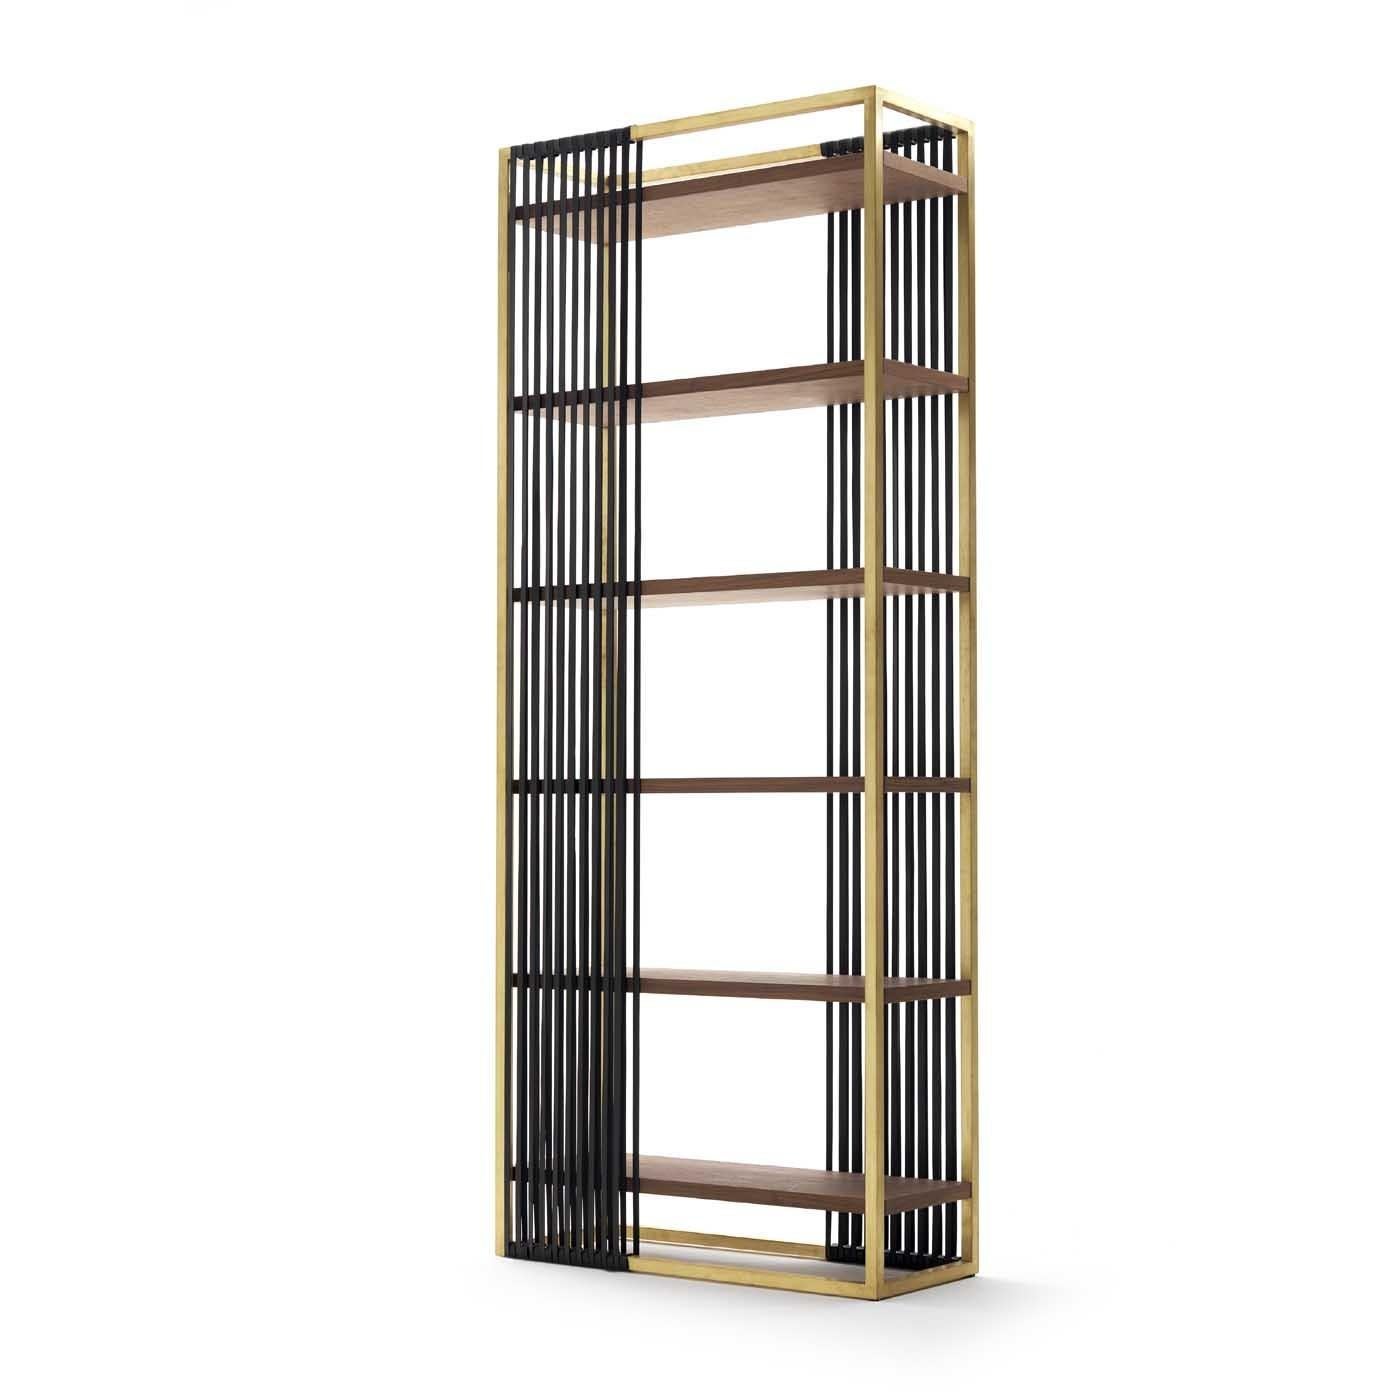 This elegant bookcase is part of the Claire collection, distinctive for its linear silhouette, superb materials used, and striking finishes. This piece has a metal structure with a satin brass finish that creates an elongated rectangle that contains